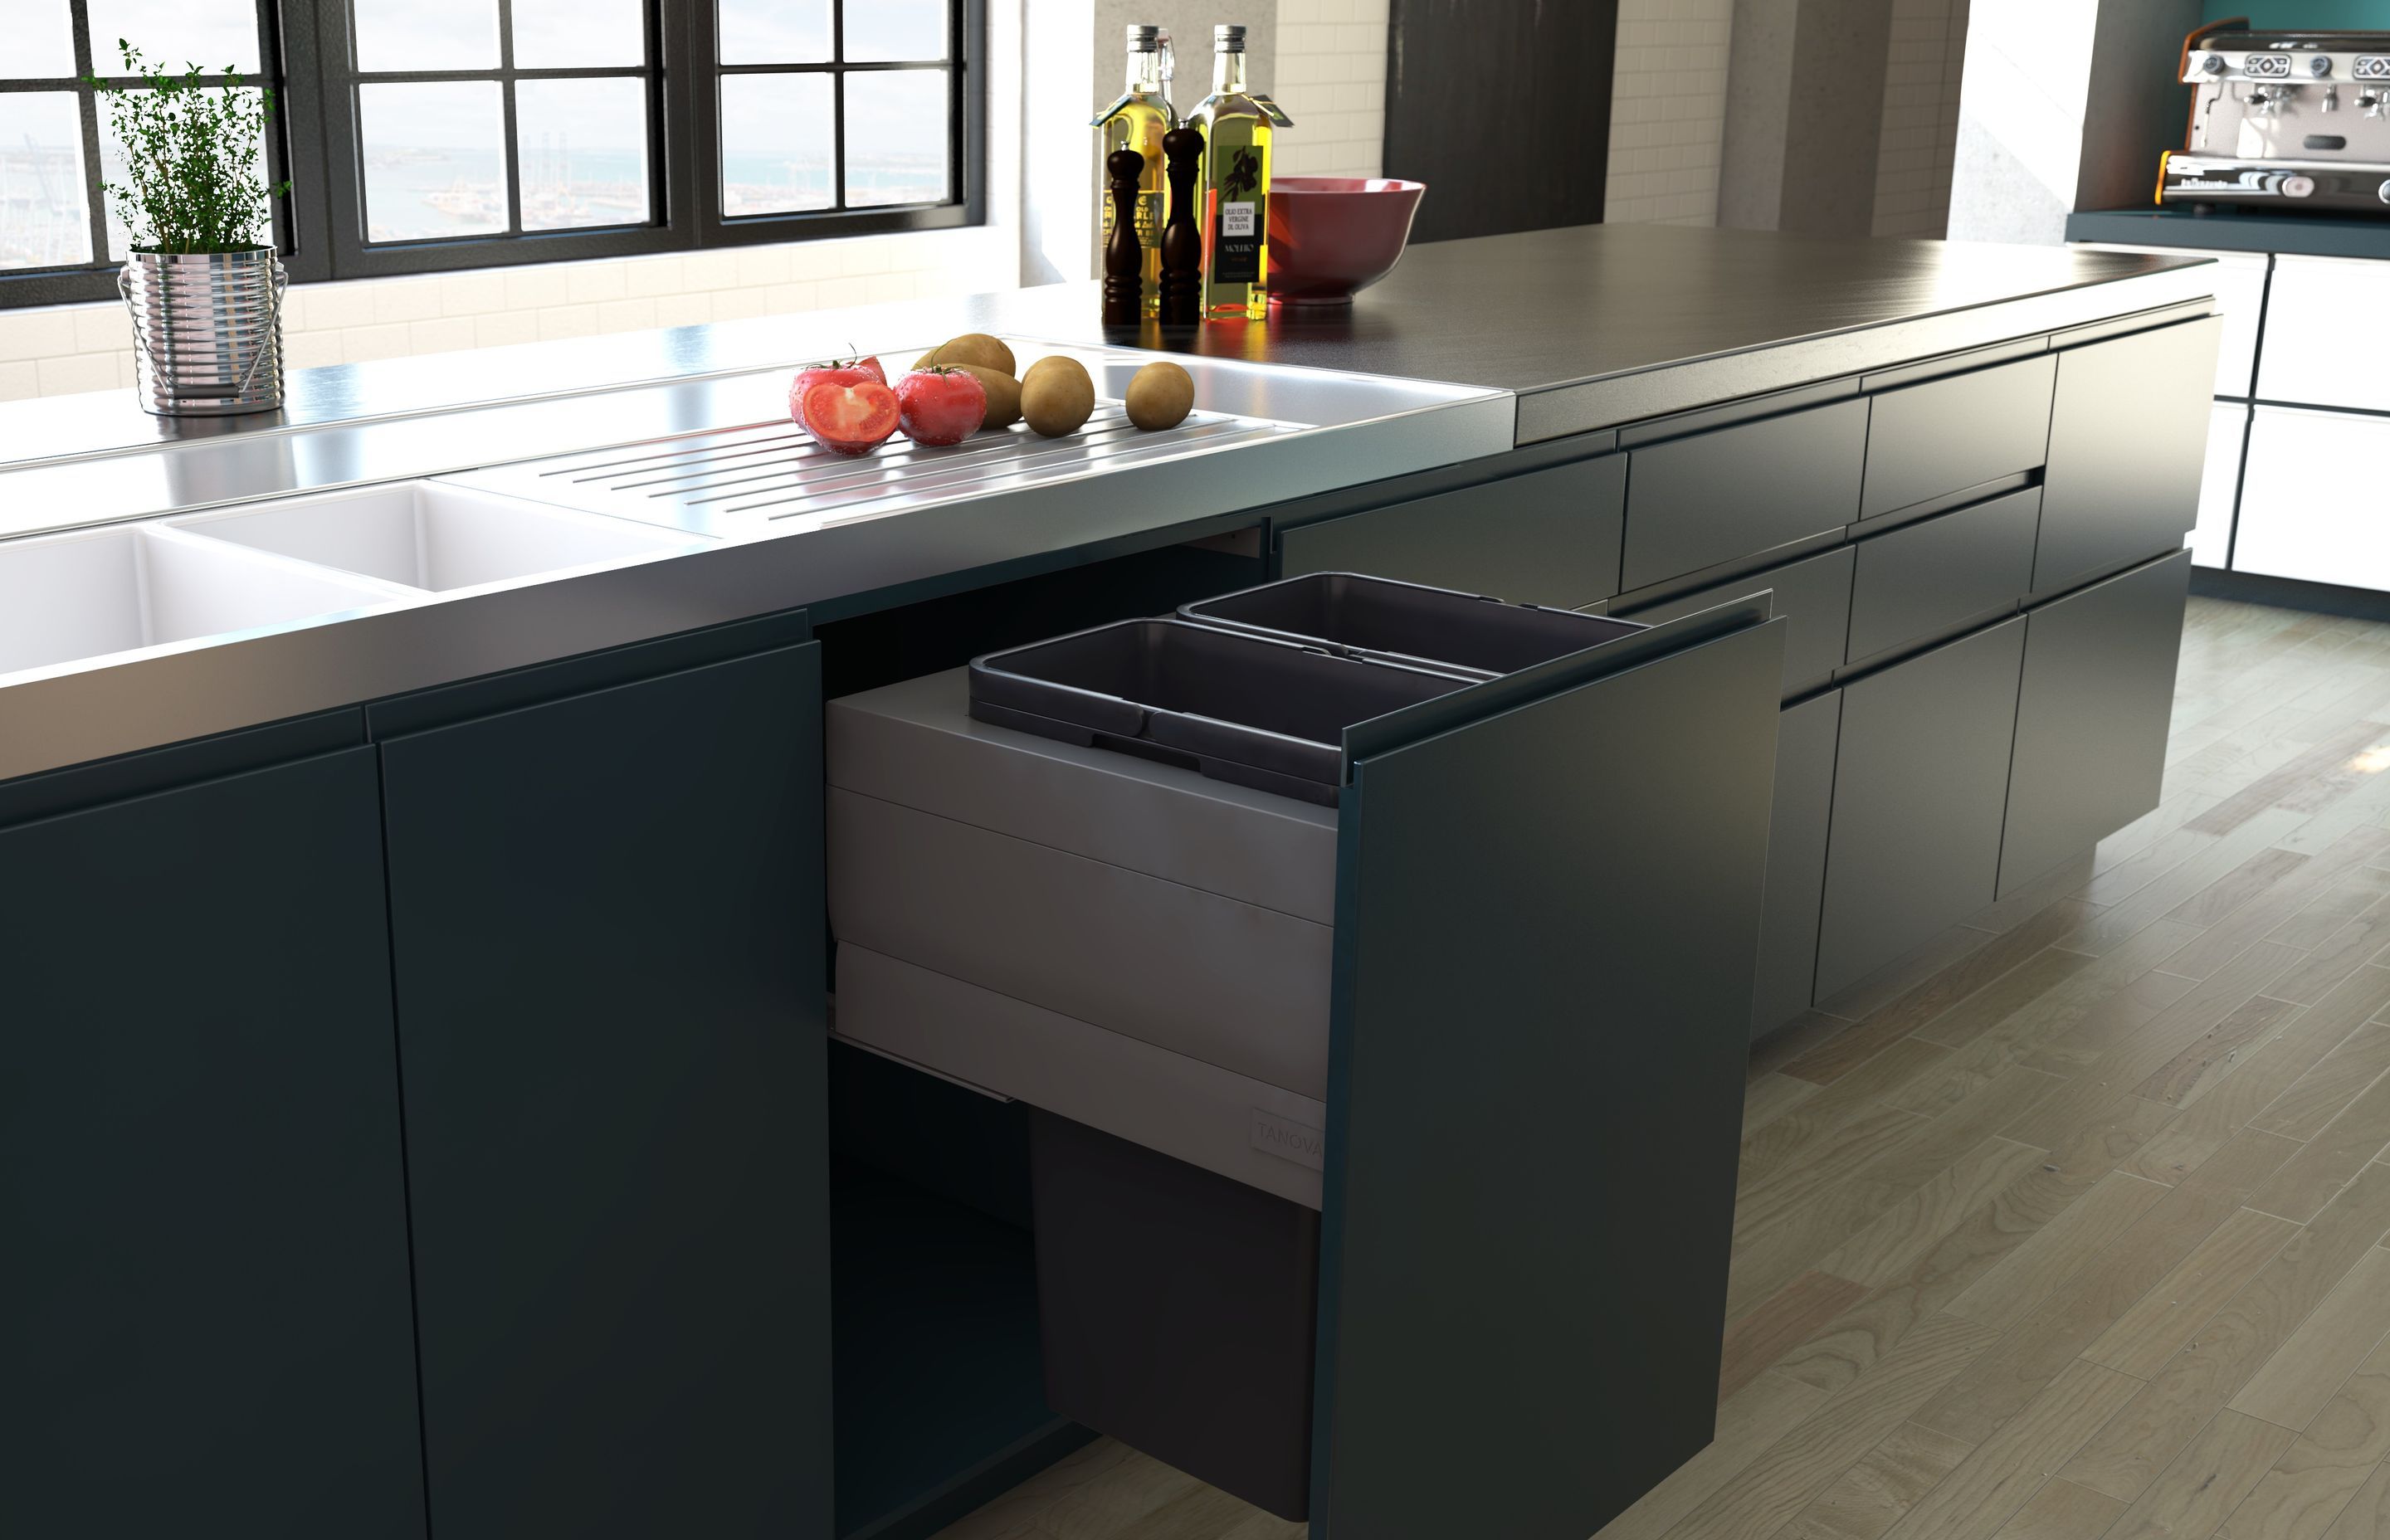 Four innovative pull-out kitchen bin and laundry systems